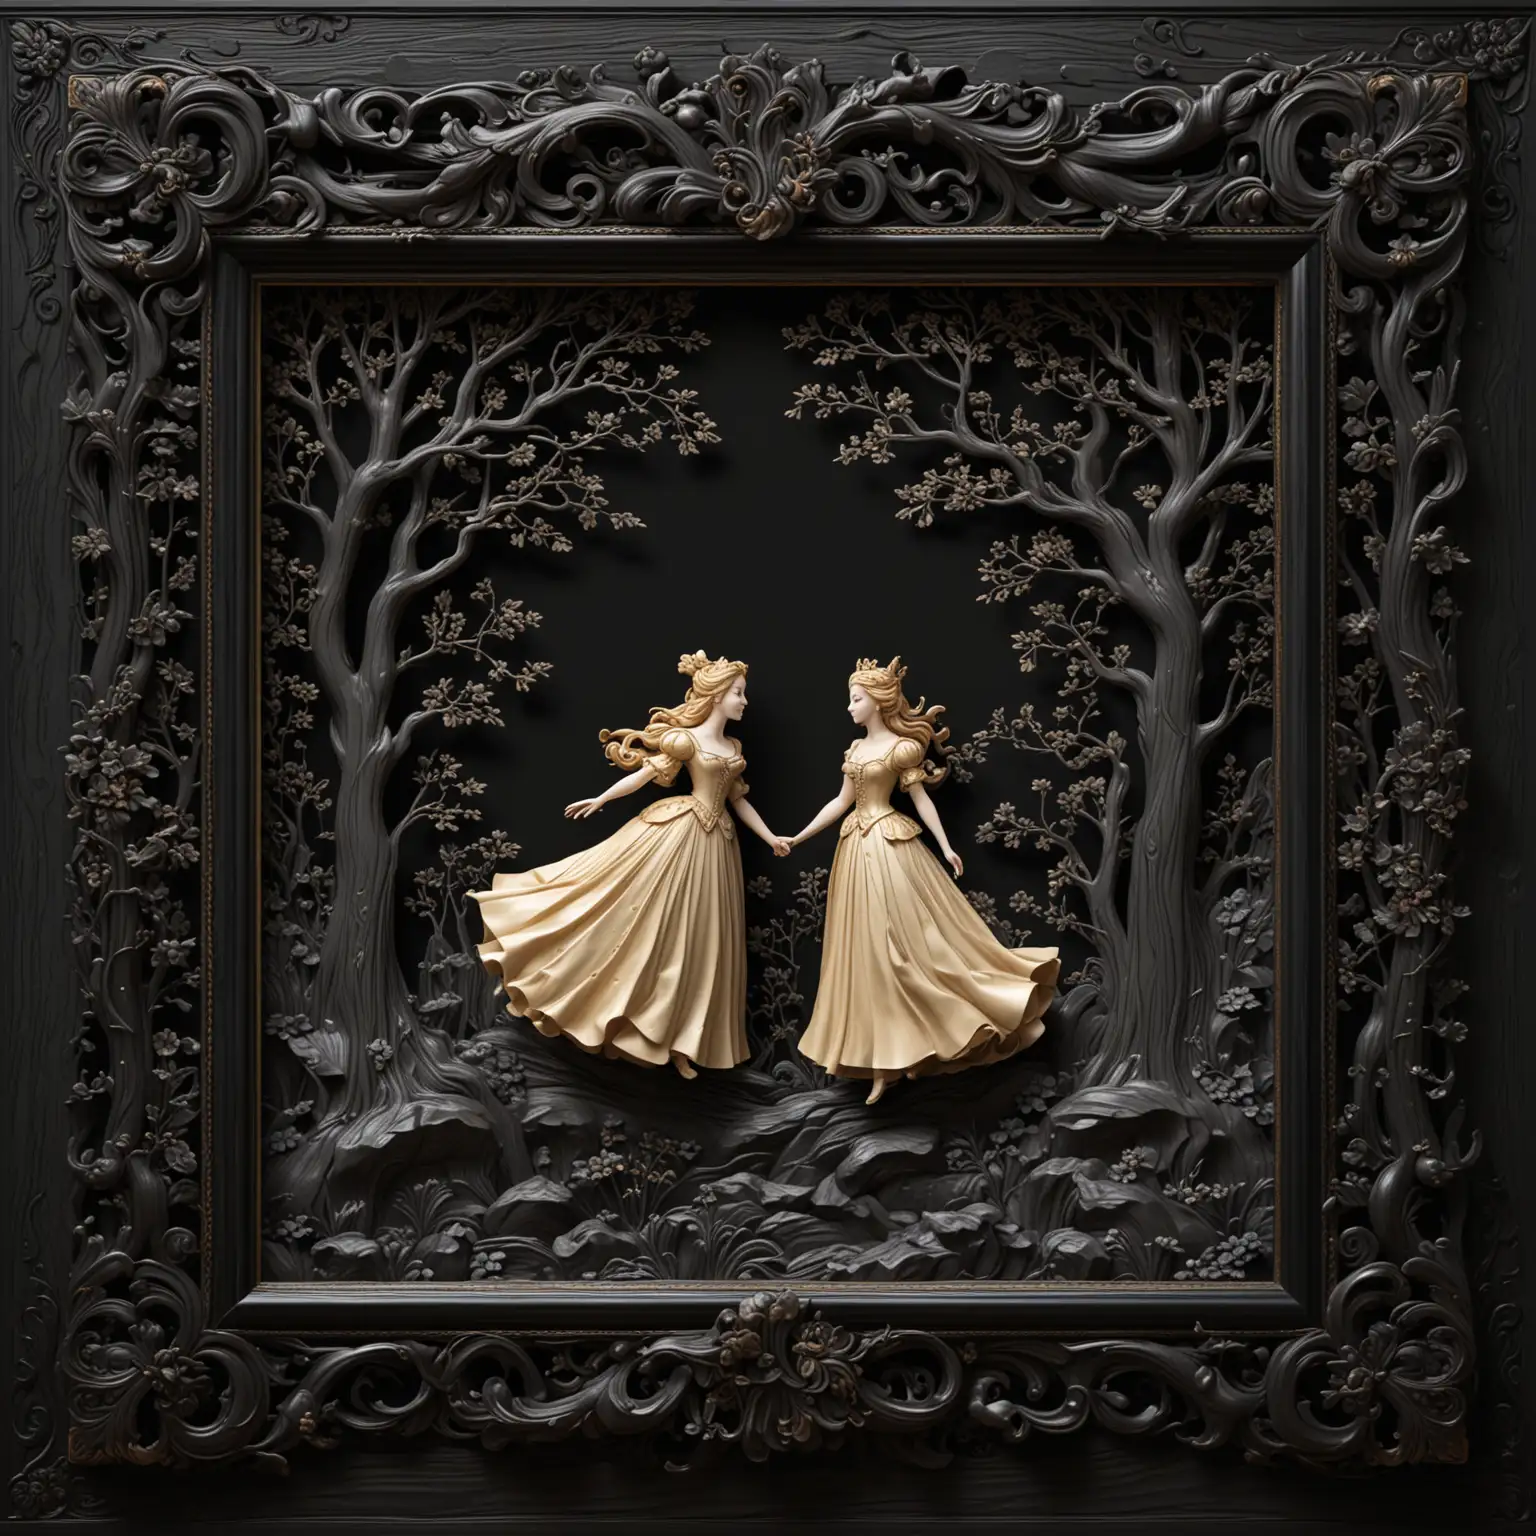 Exquisite-3D-Black-Lacquered-Wood-Carving-of-the-Twelve-Dancing-Princesses